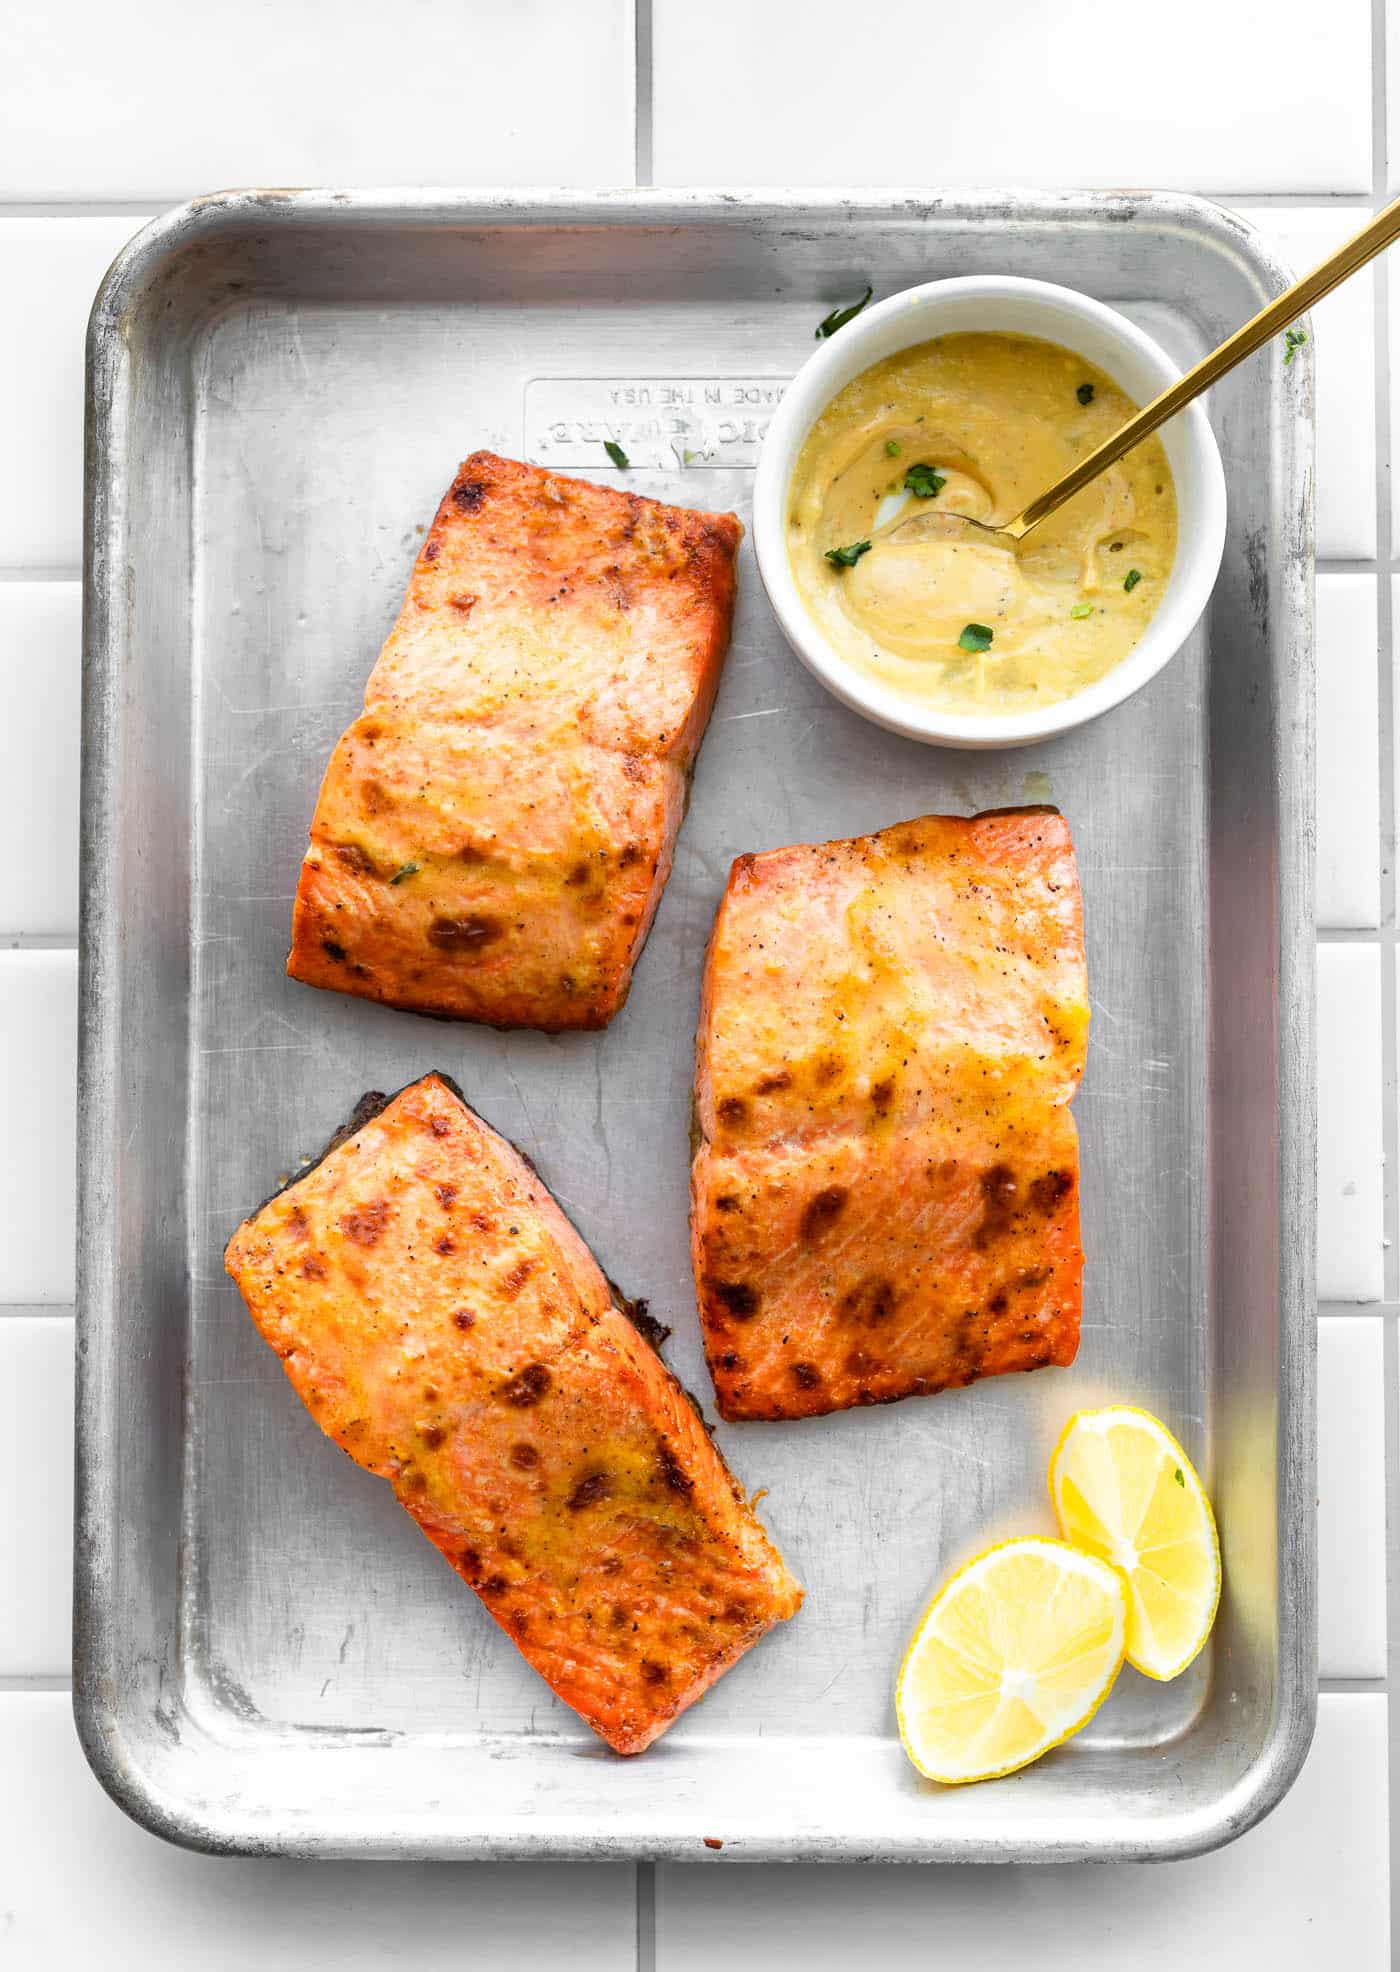 3 pieces of air fryer salmon in a baking dish with lemon wedges and a white bowl filled with creamy mustard sauce on the side